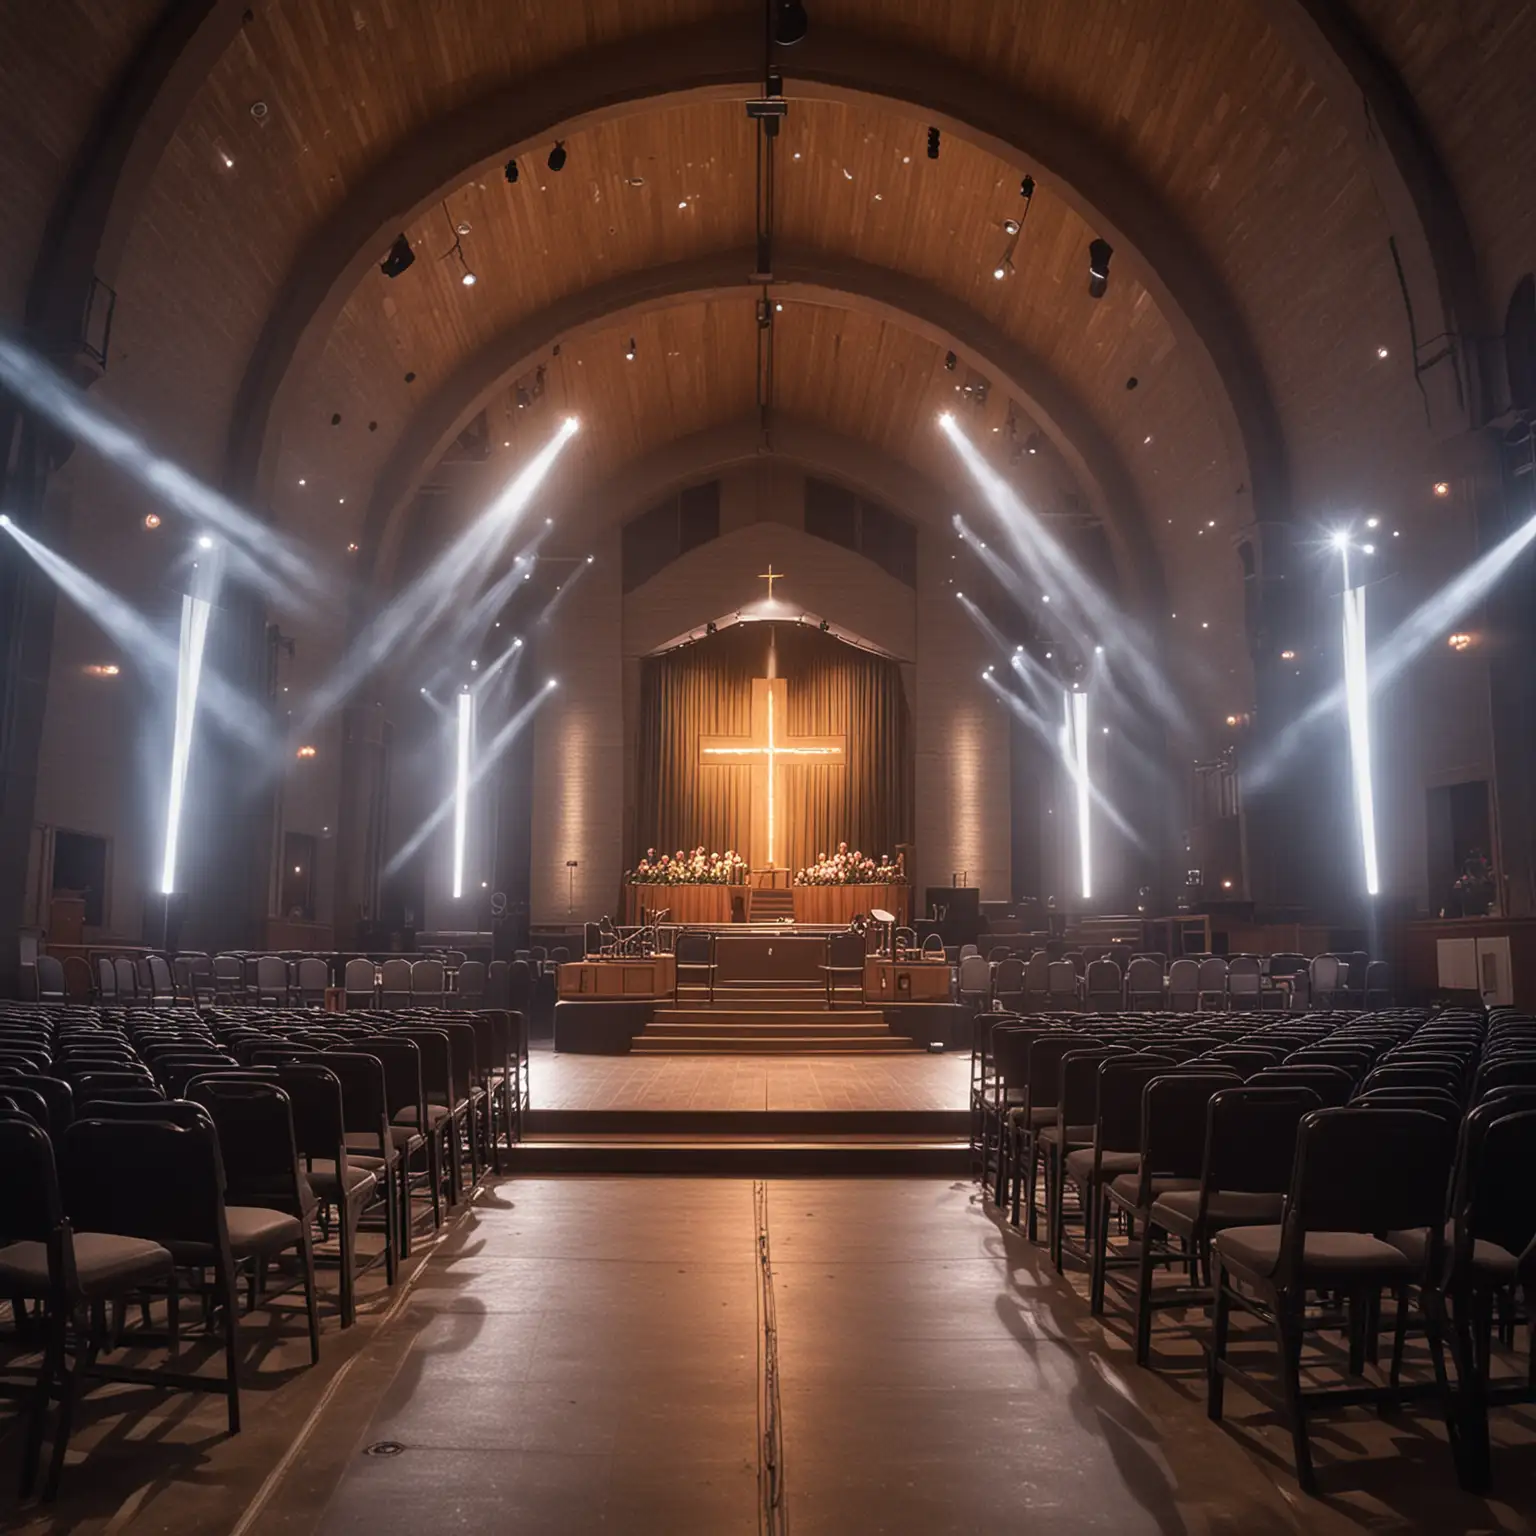 create an image of a church stage with modern stage lighting, seatubg is cushioned chairs
